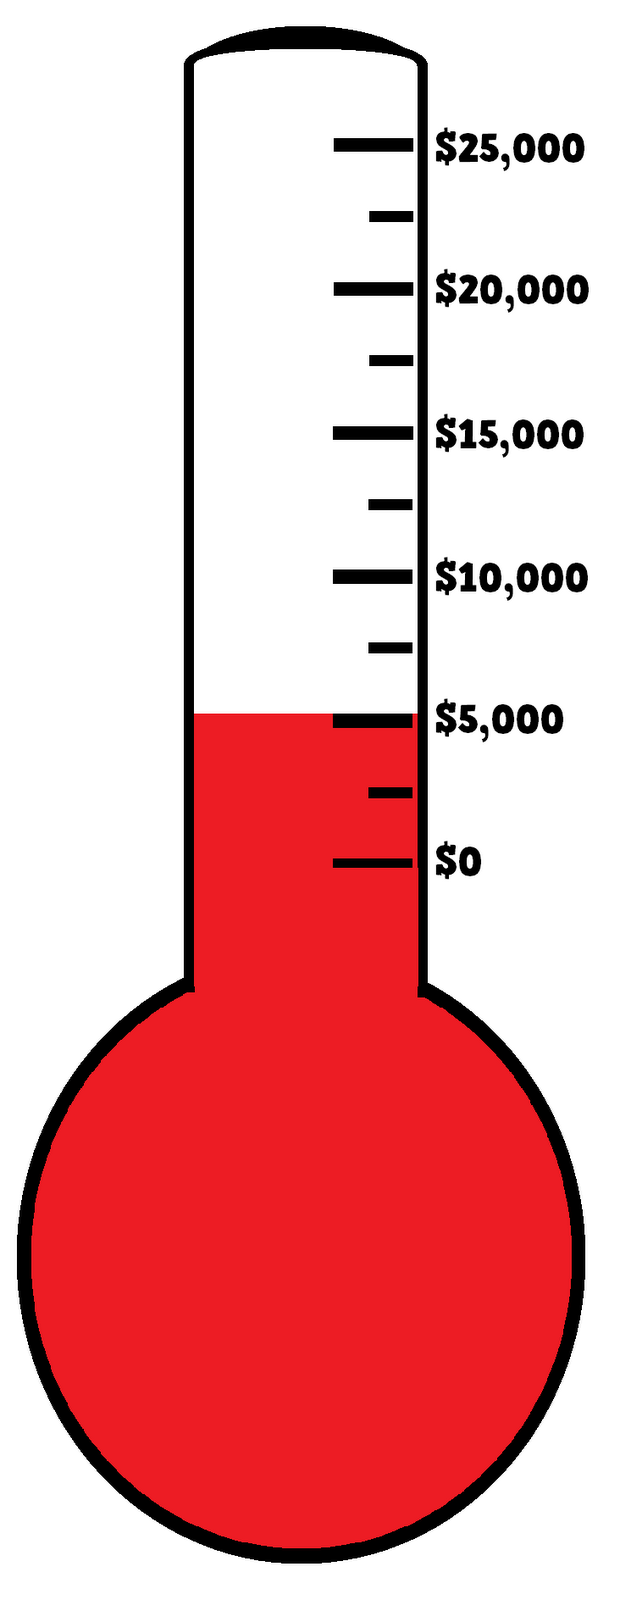 Fundraising Goal Thermometer Clipart